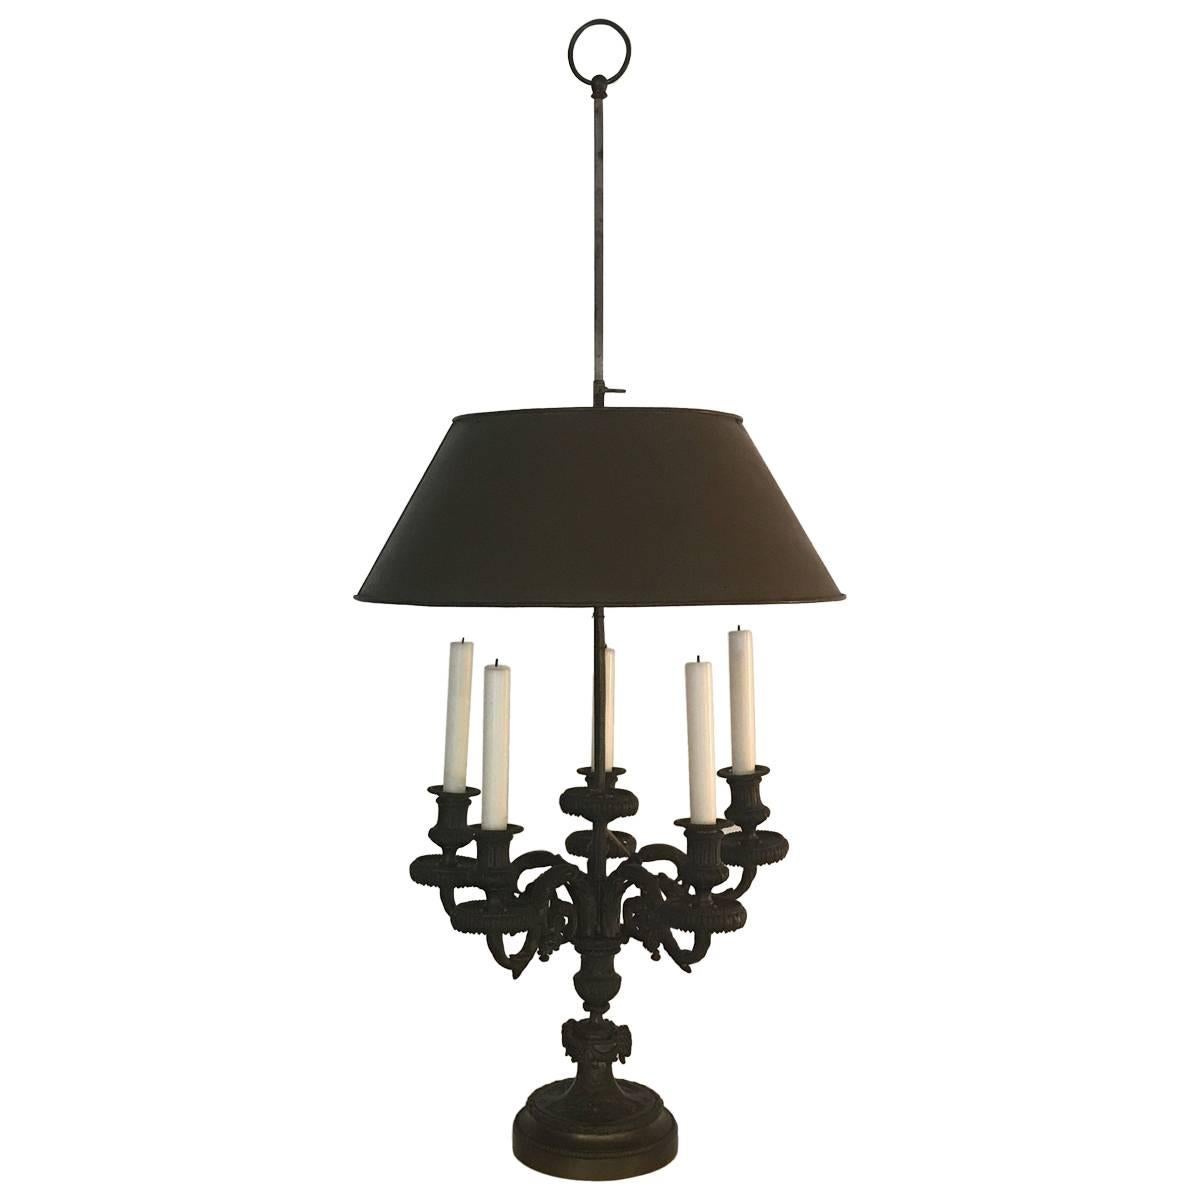 Cast Patinated Bronze Candelabra Lamp with Tole Shade